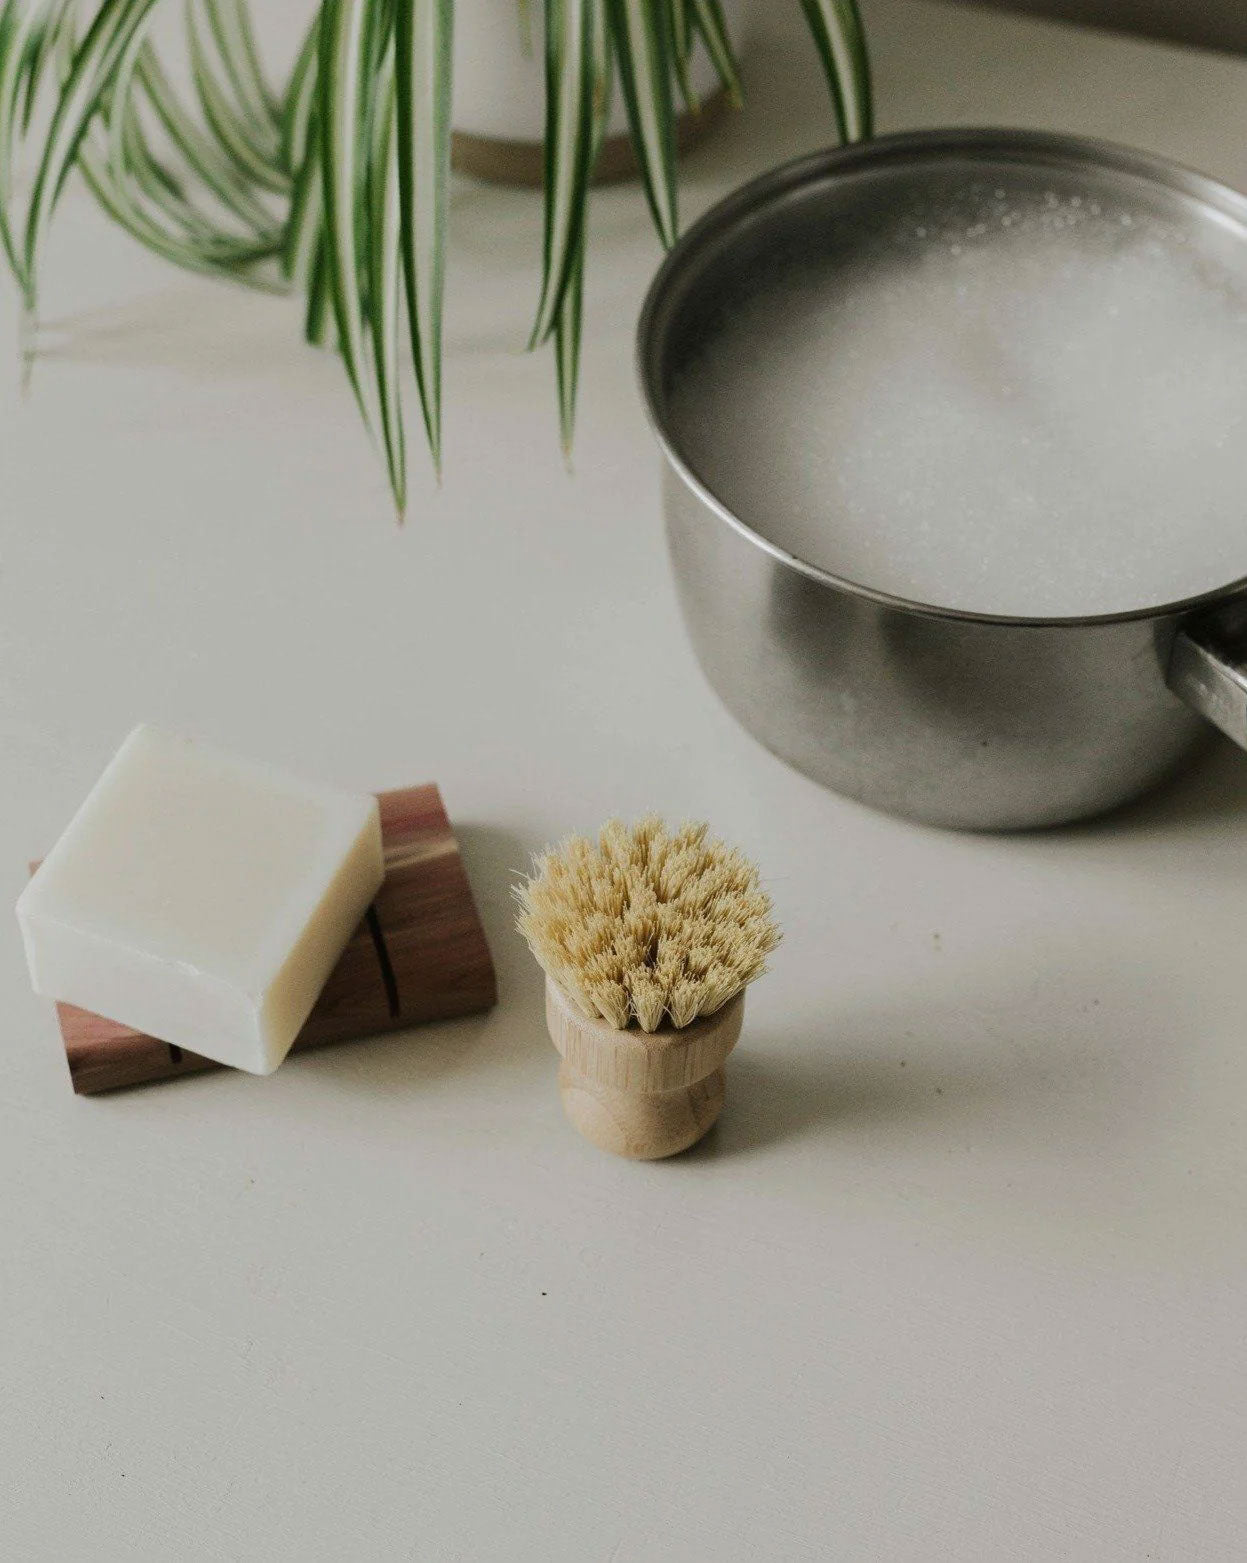 This pot scrubber is made of purely plant materials and is the perfect sustainable alternative to disposable, synthetic pot scrubbers and dish sponges!